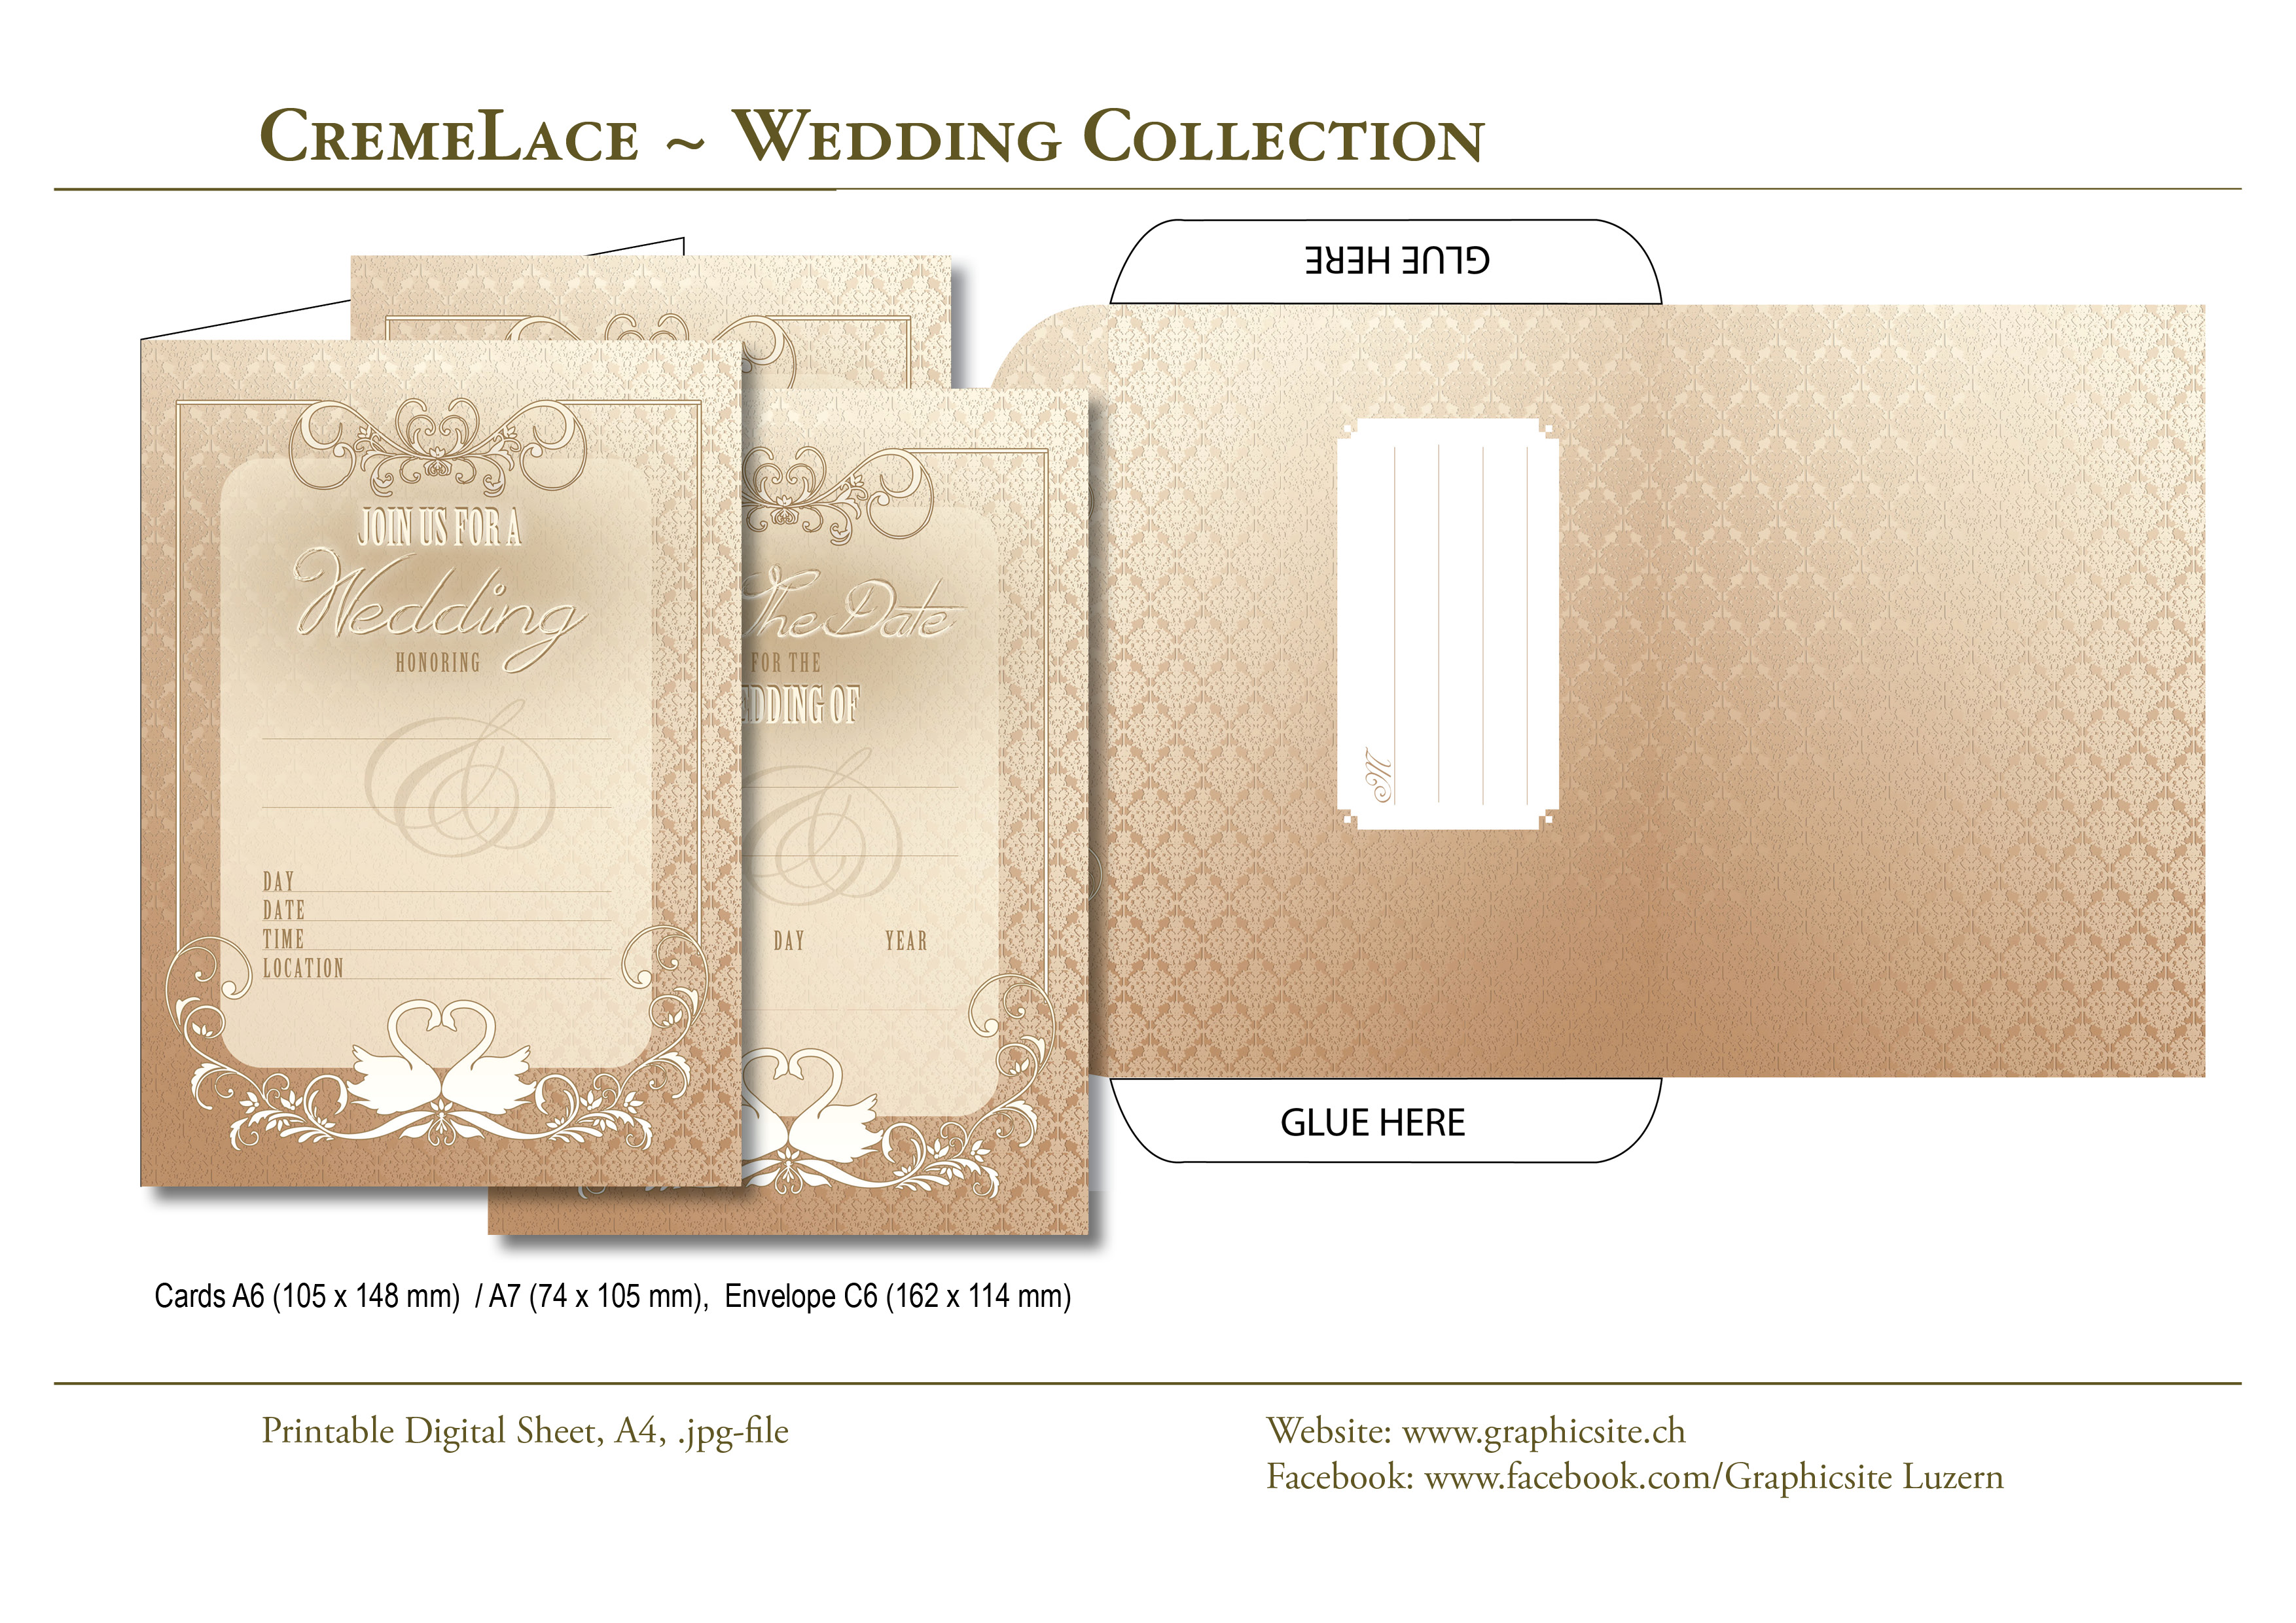 Printable Digital Sheets - Wedding Collection - CremeLace Collection - #wedding, #invitation, #cards, #stationary, #invite, #cream, #lace, #beige, #golden, #cards, 